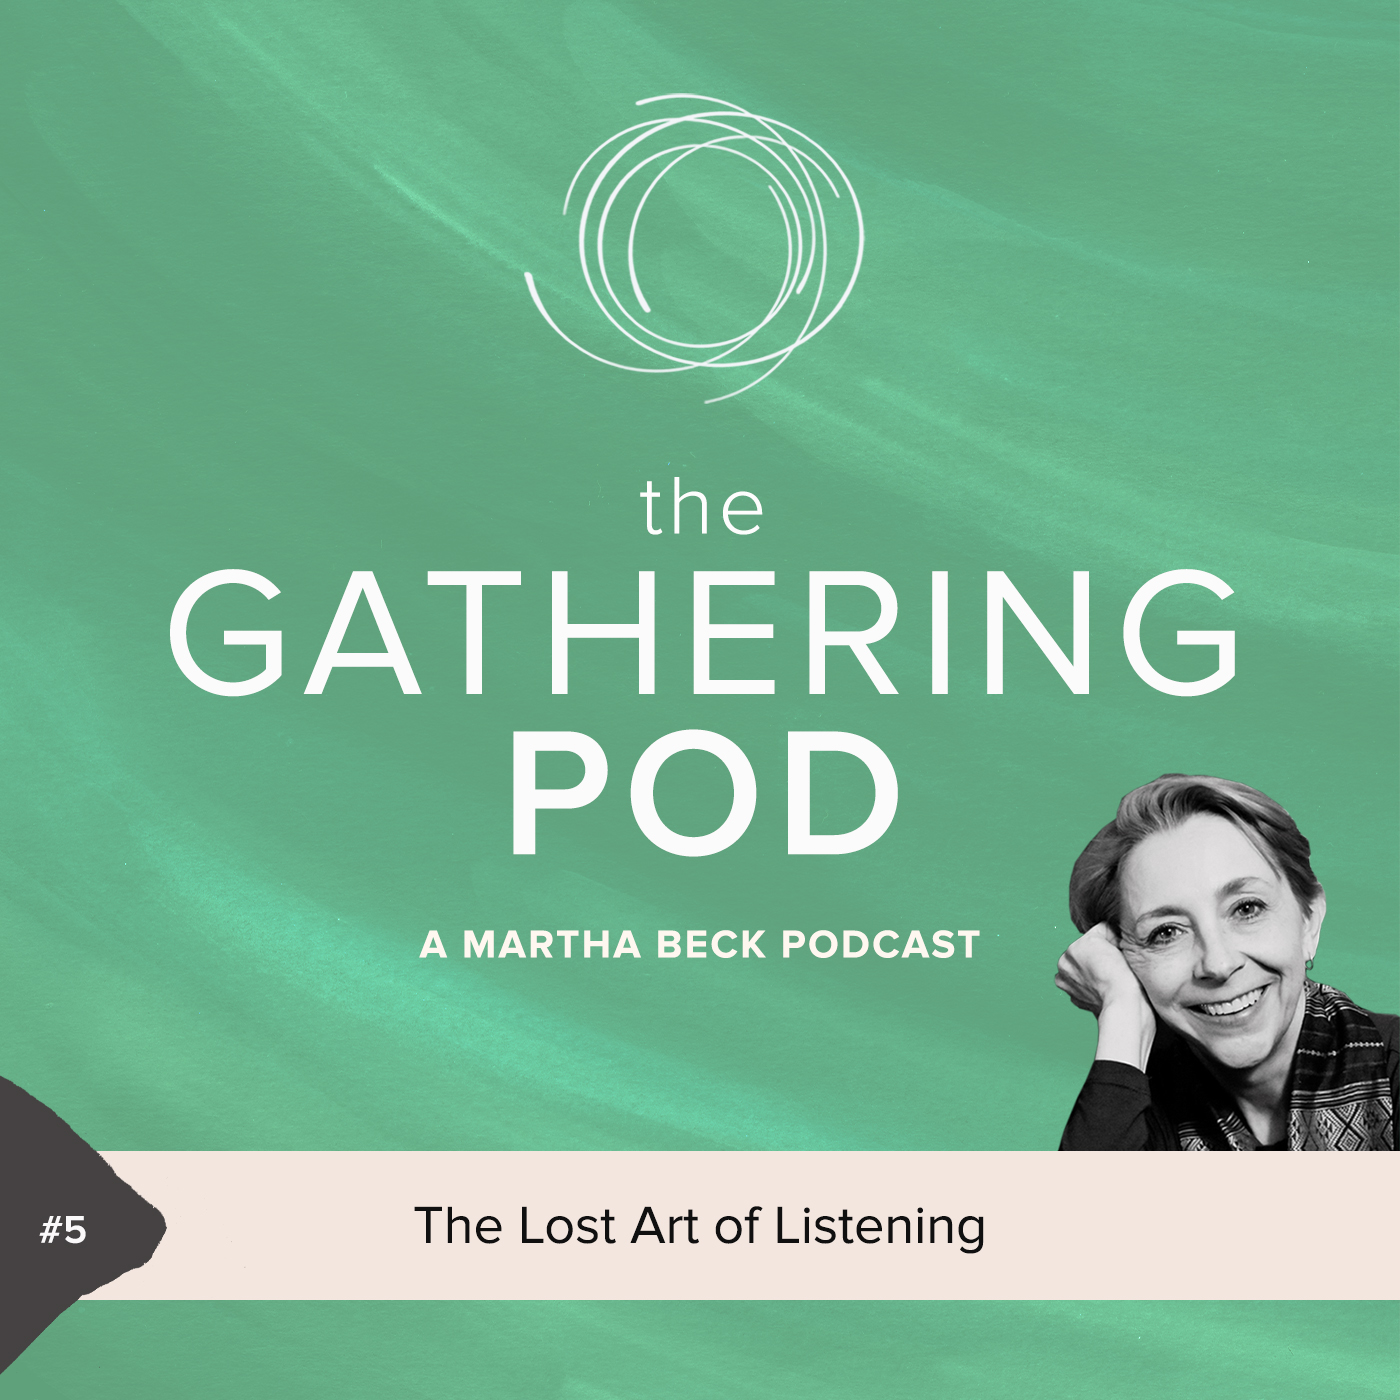 Image for The Gathering Pod A Martha Beck Podcast Episode #5 The Lost Art of Listening